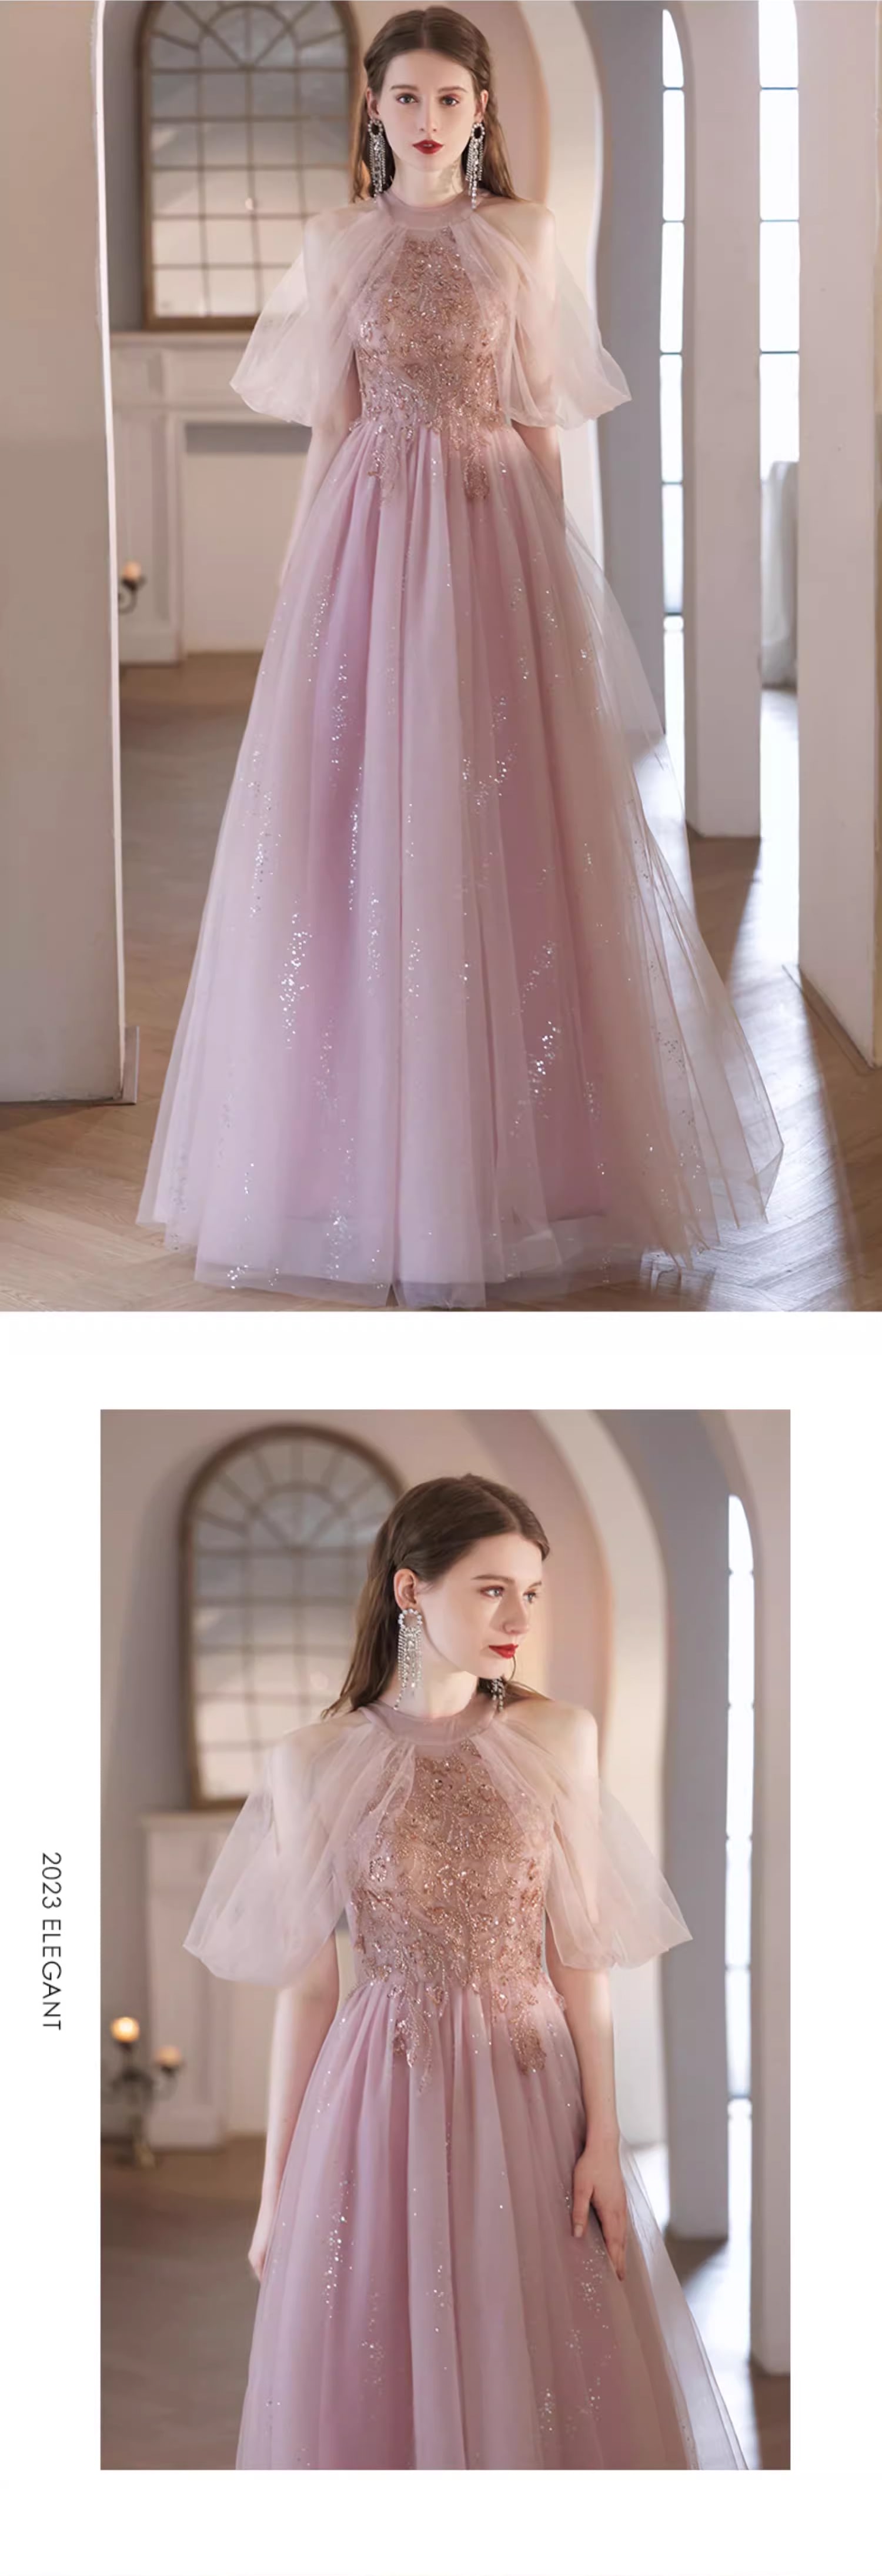 Pretty Pink Prom Party Long Slip Dress Cute Bow-Tie Ball Gown – FloraShe